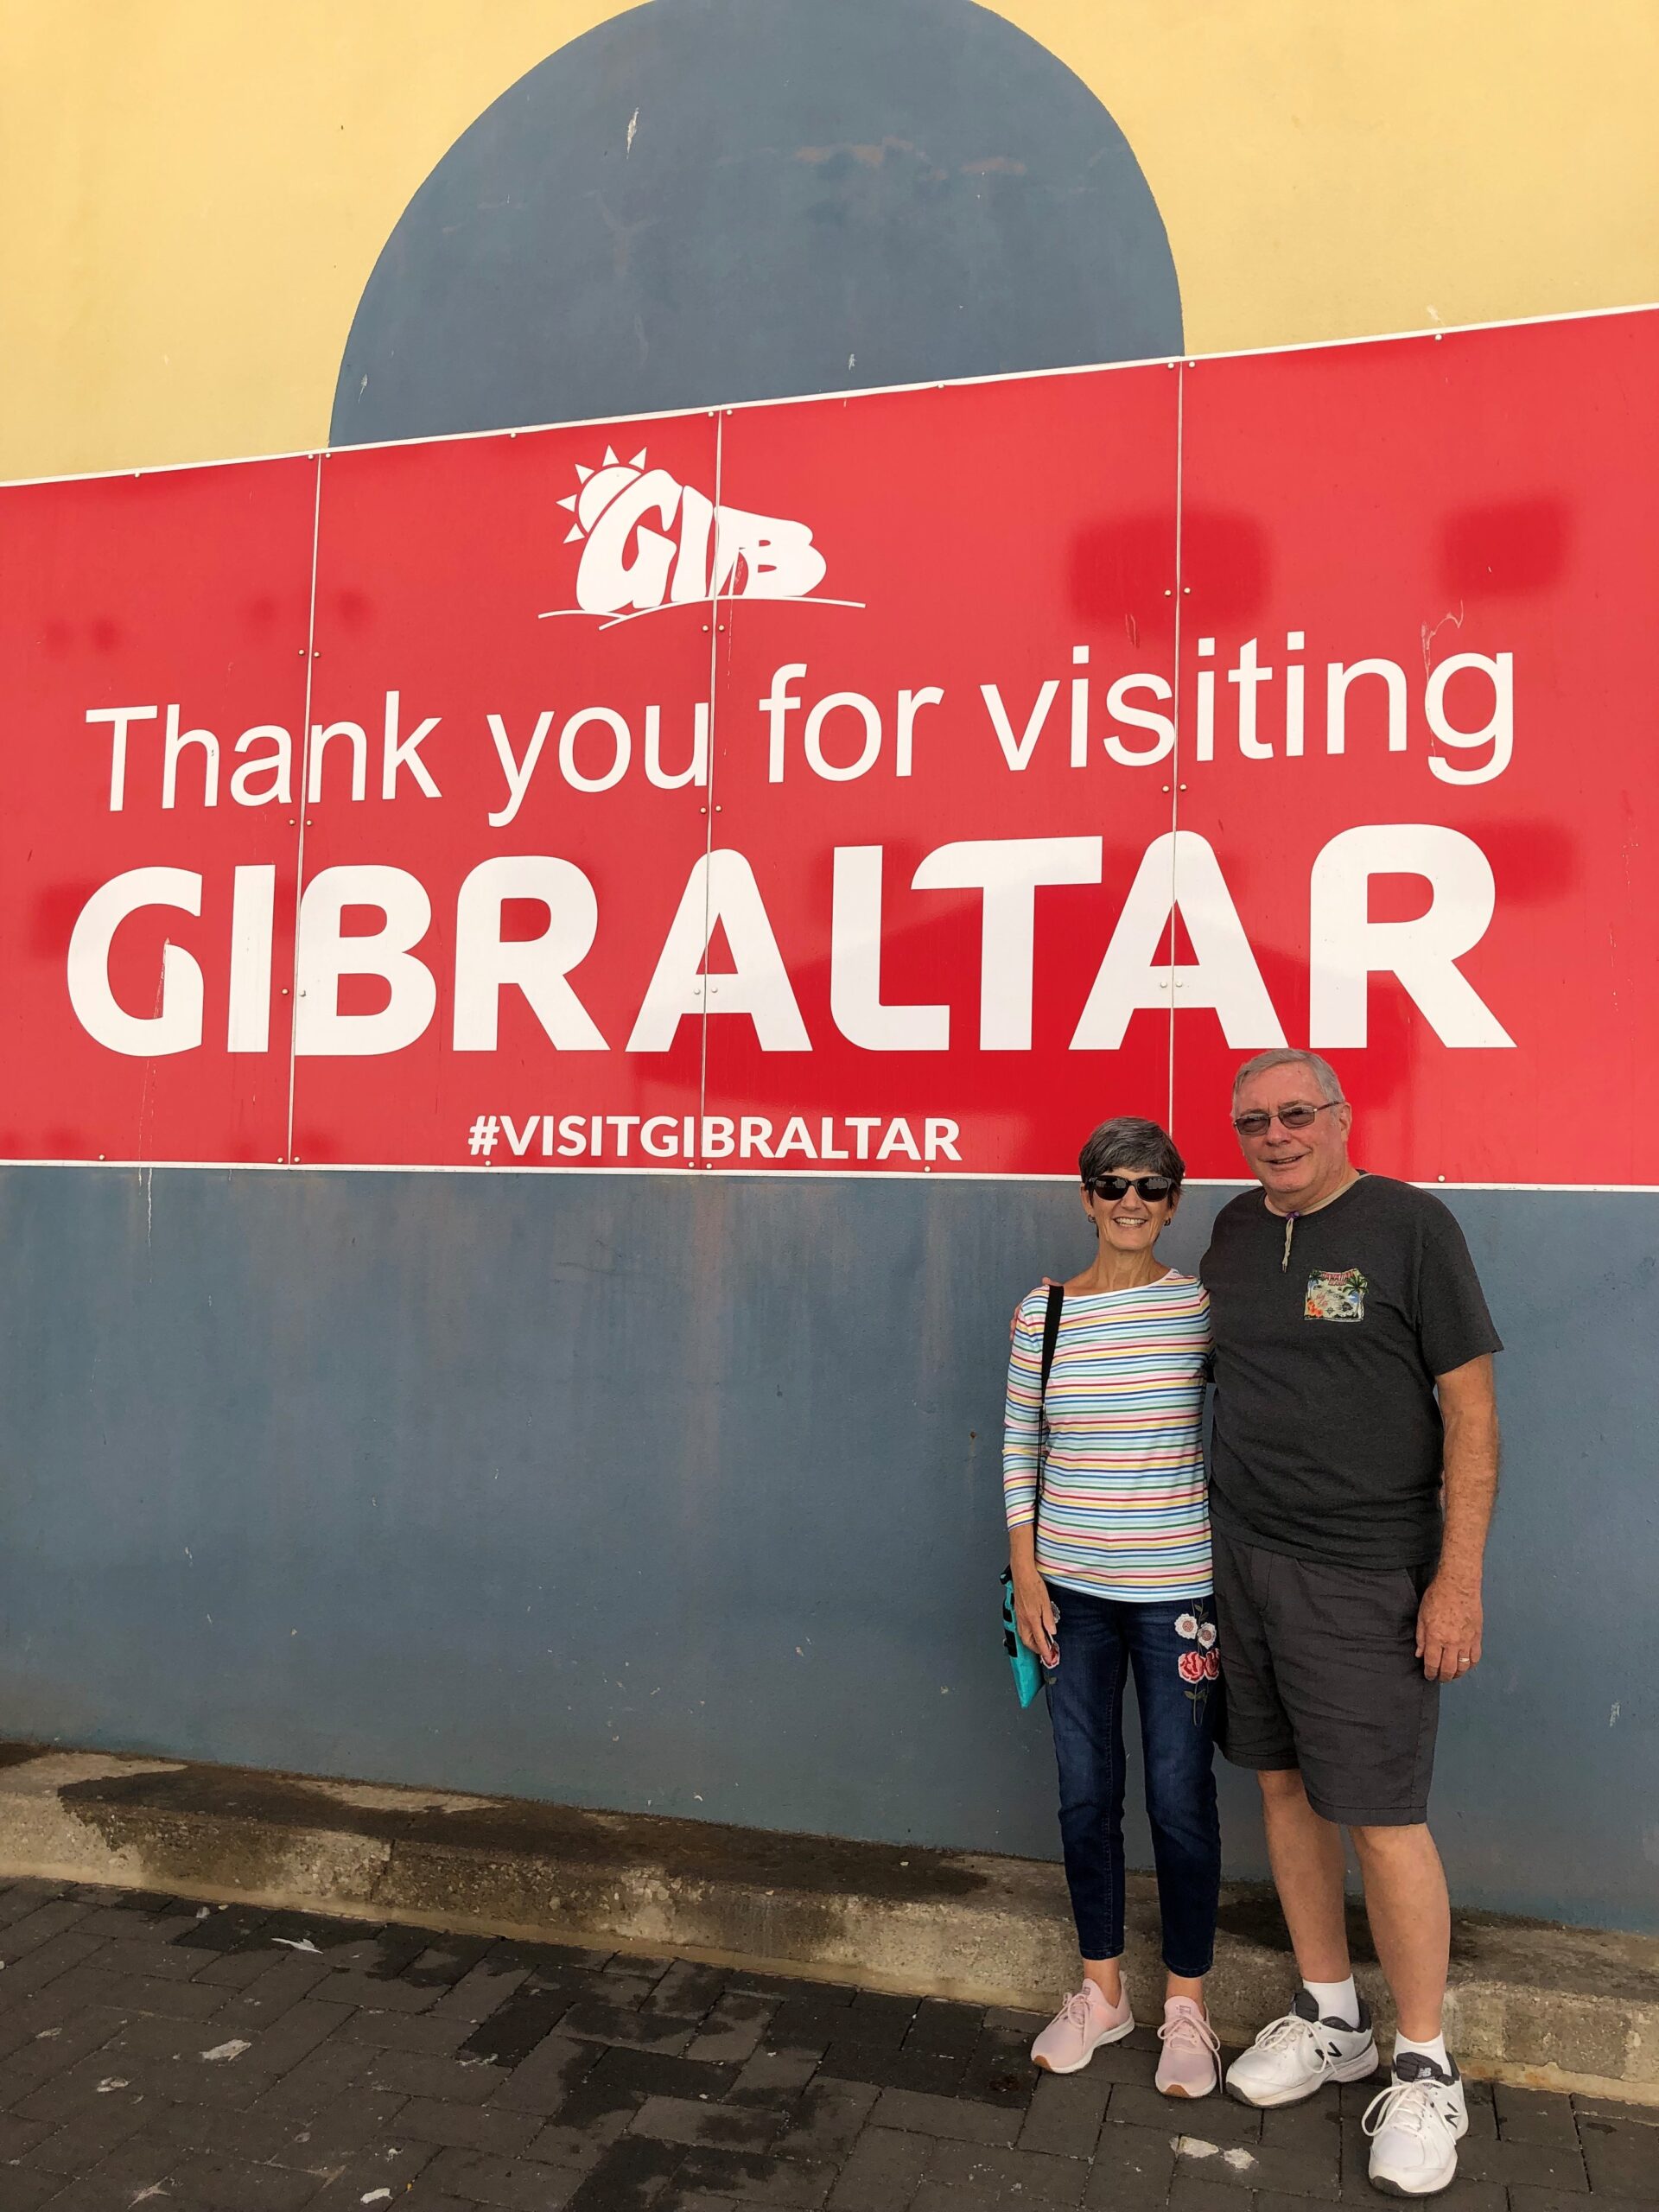 Al and Pam in Gibraltar